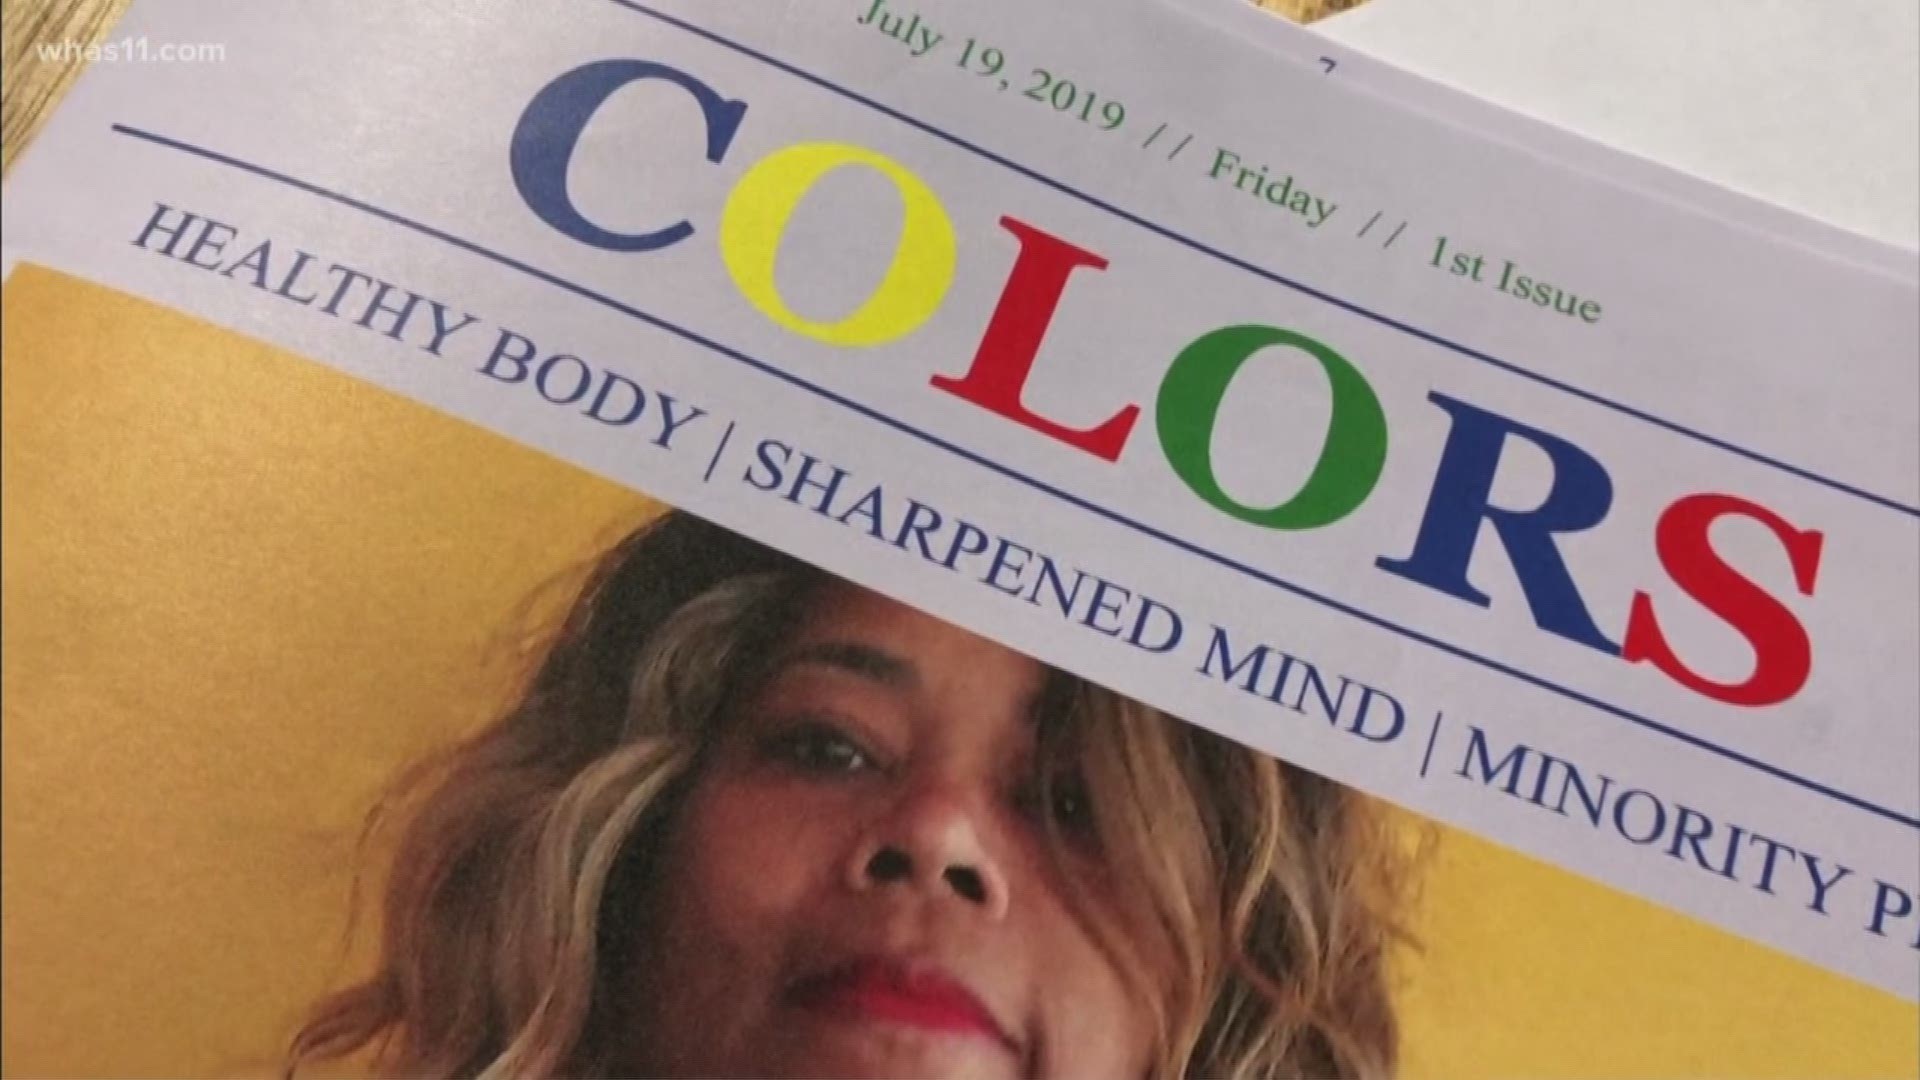 Reverend Gerome Sutton - a Louisville minister - is launching a newspaper called "Colors". Writer Anthony Gaines the 2nd says it's an effort to give a voice to those who feel they are not being heard.